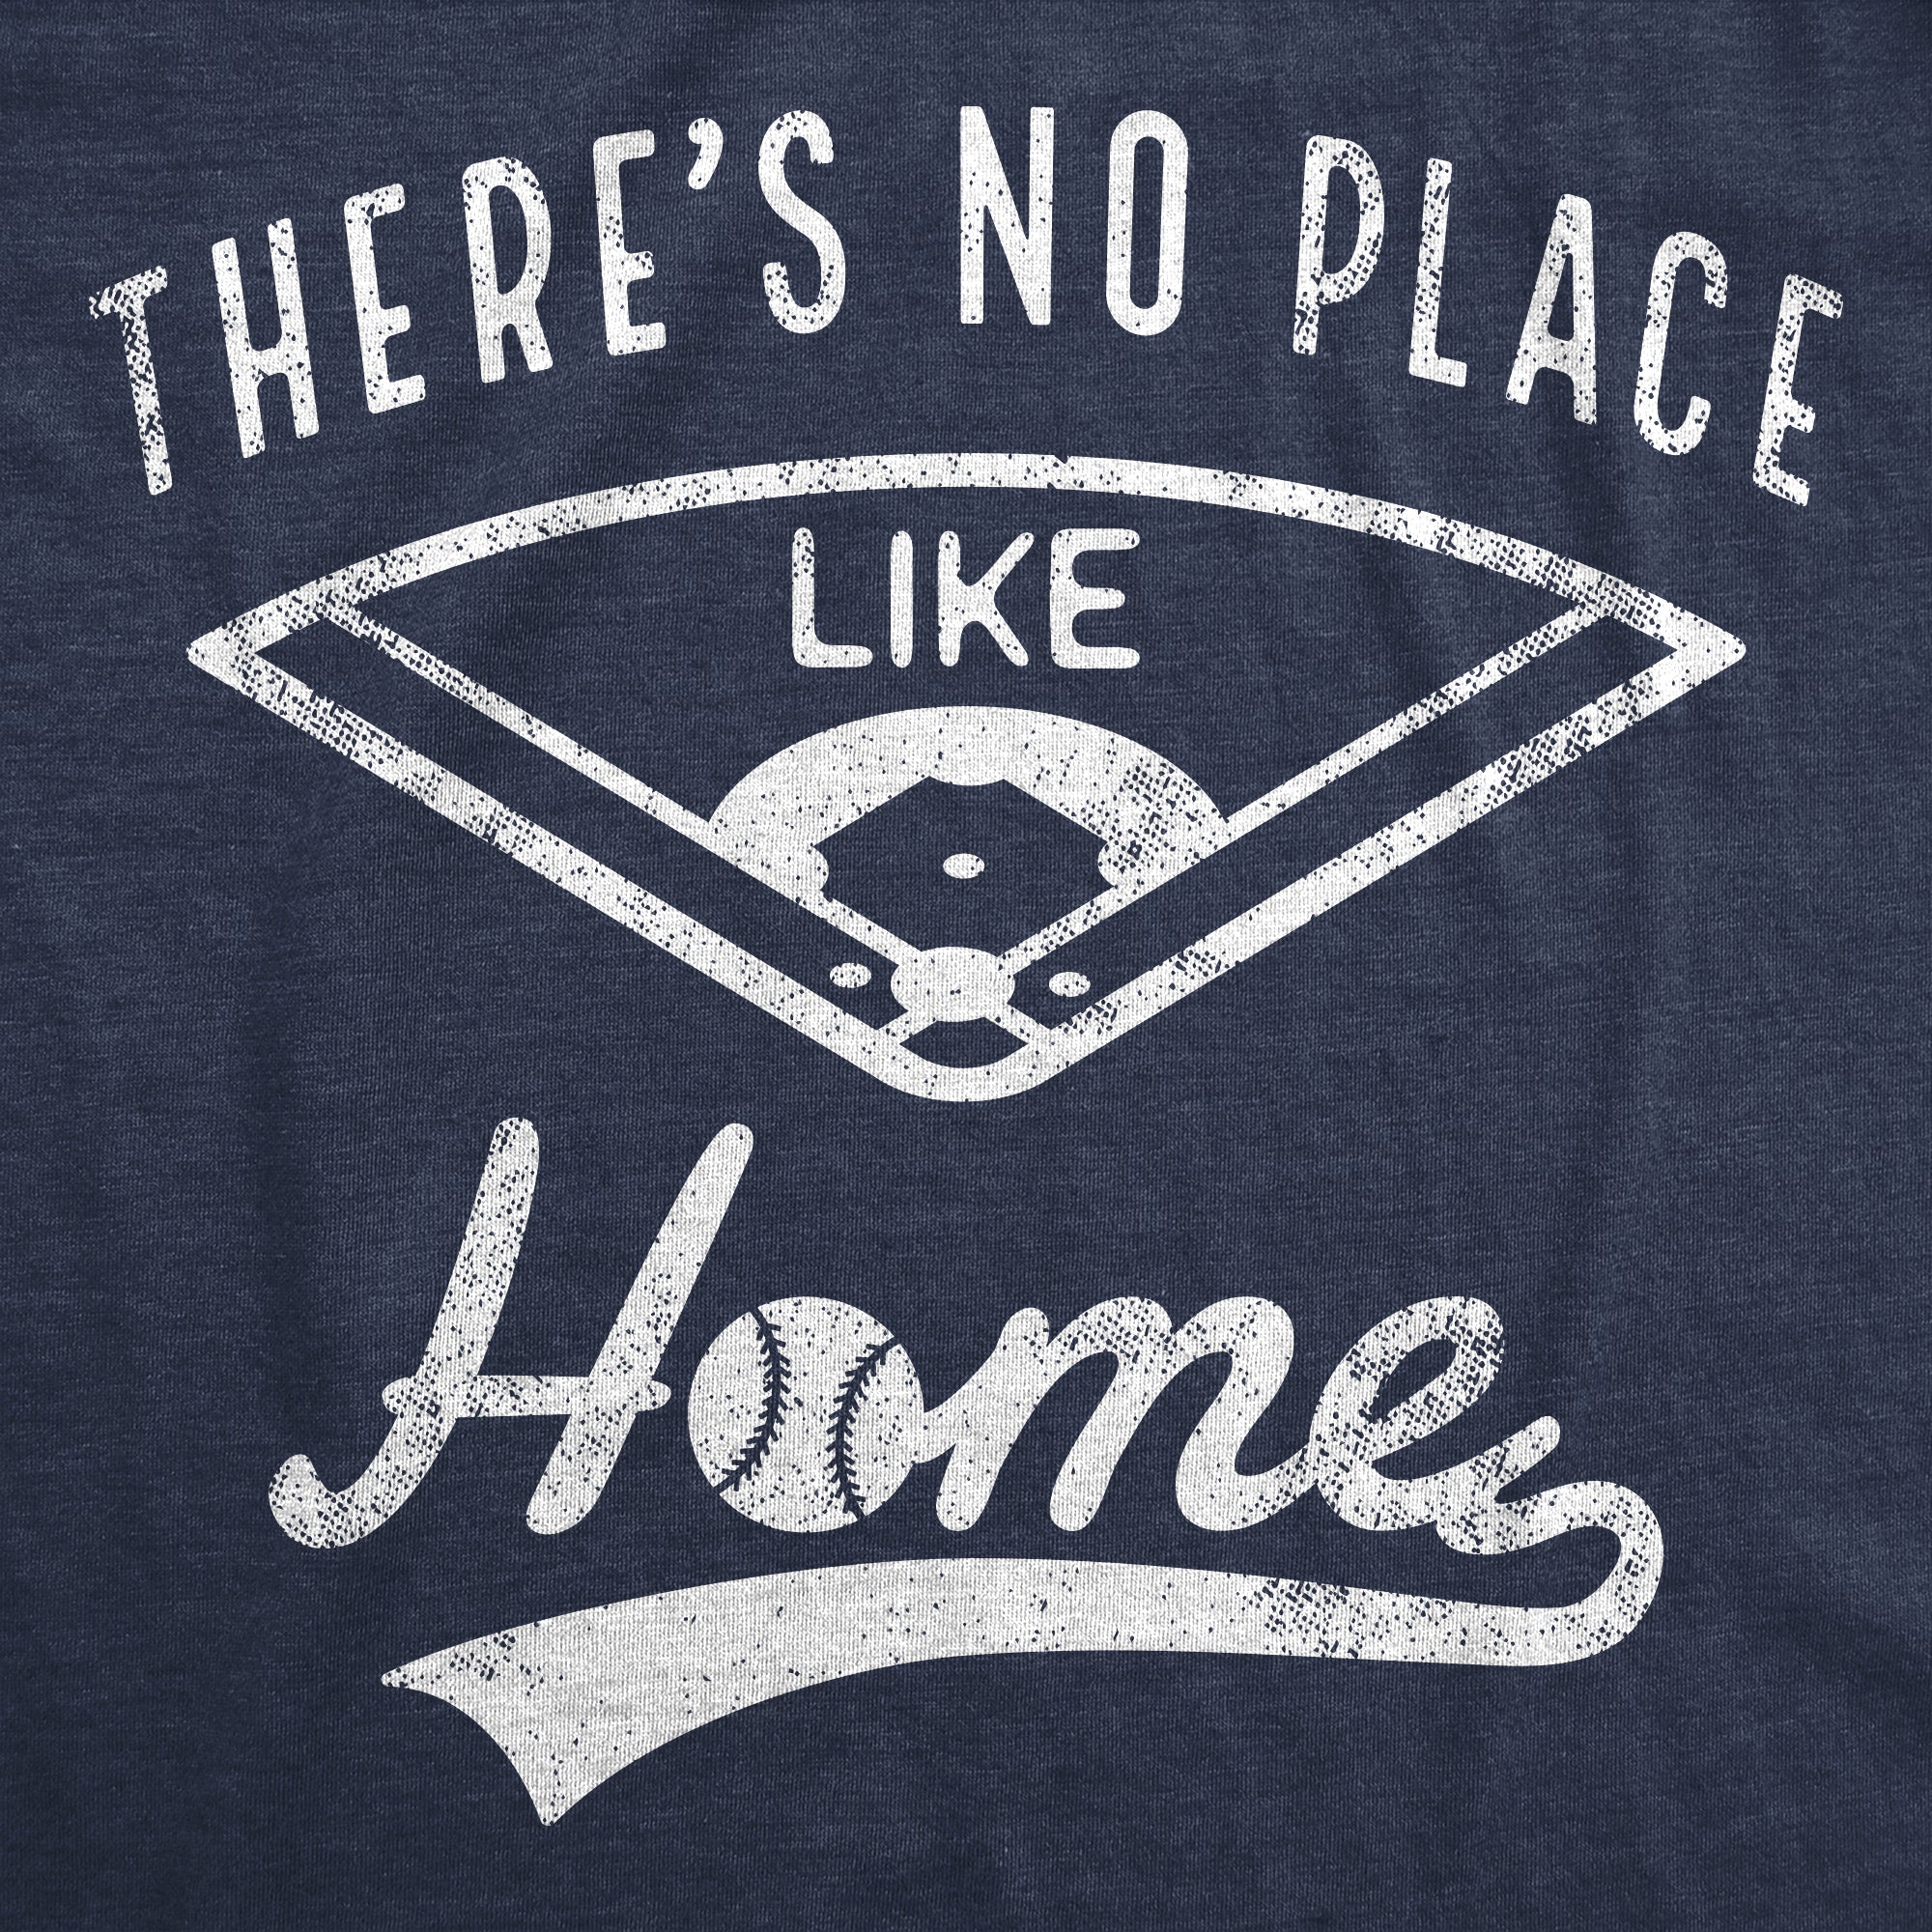 Funny Heather Navy Theres No Place Like Home Womens T Shirt Nerdy Baseball Sarcastic Tee